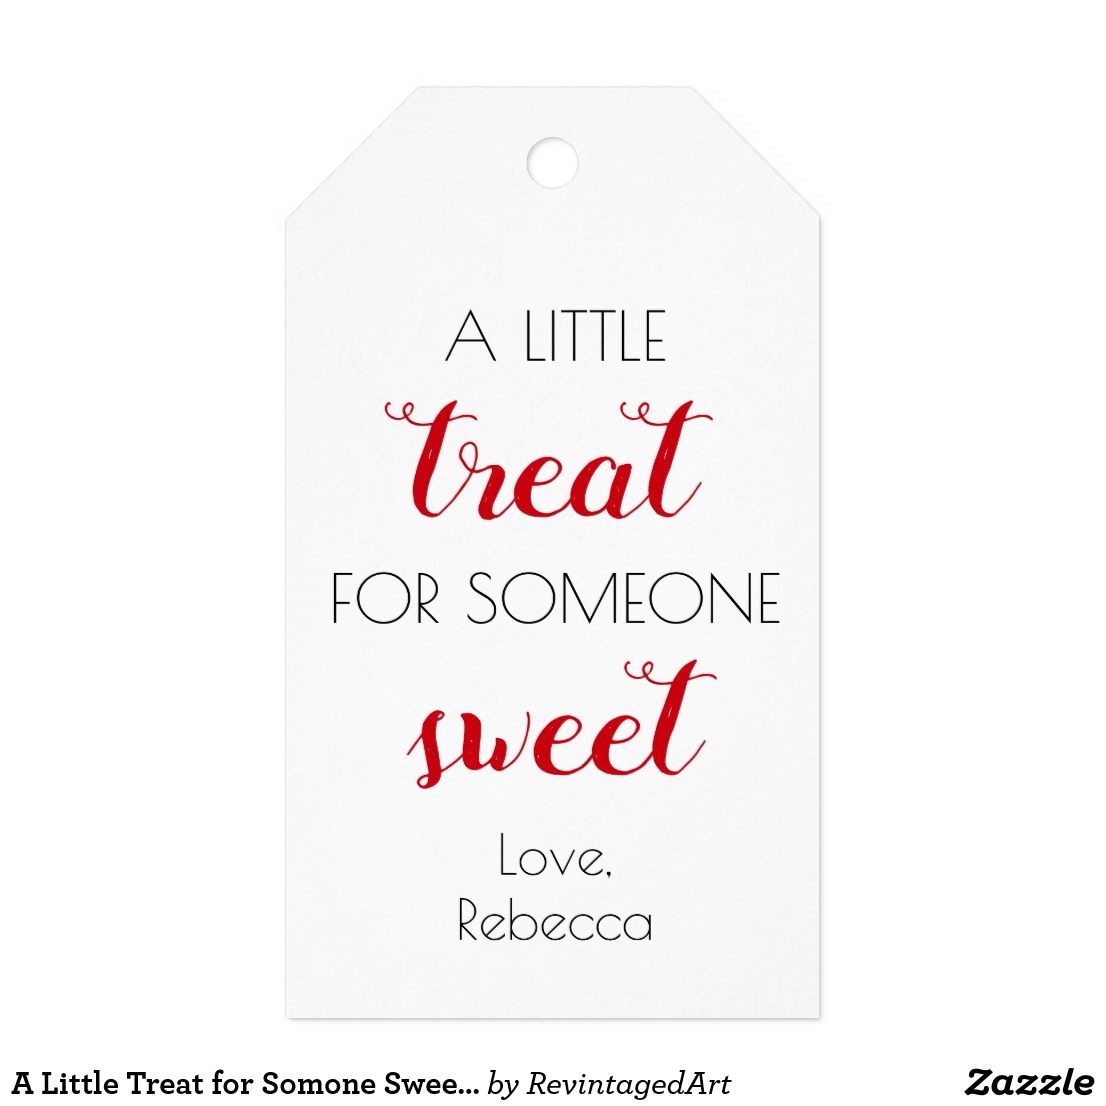 A Little Treat For Somone Sweet Valentine s Day Gift Tags Zazzle Valentine Gifts For Kids Encouragement Gifts Valentines Day Activities